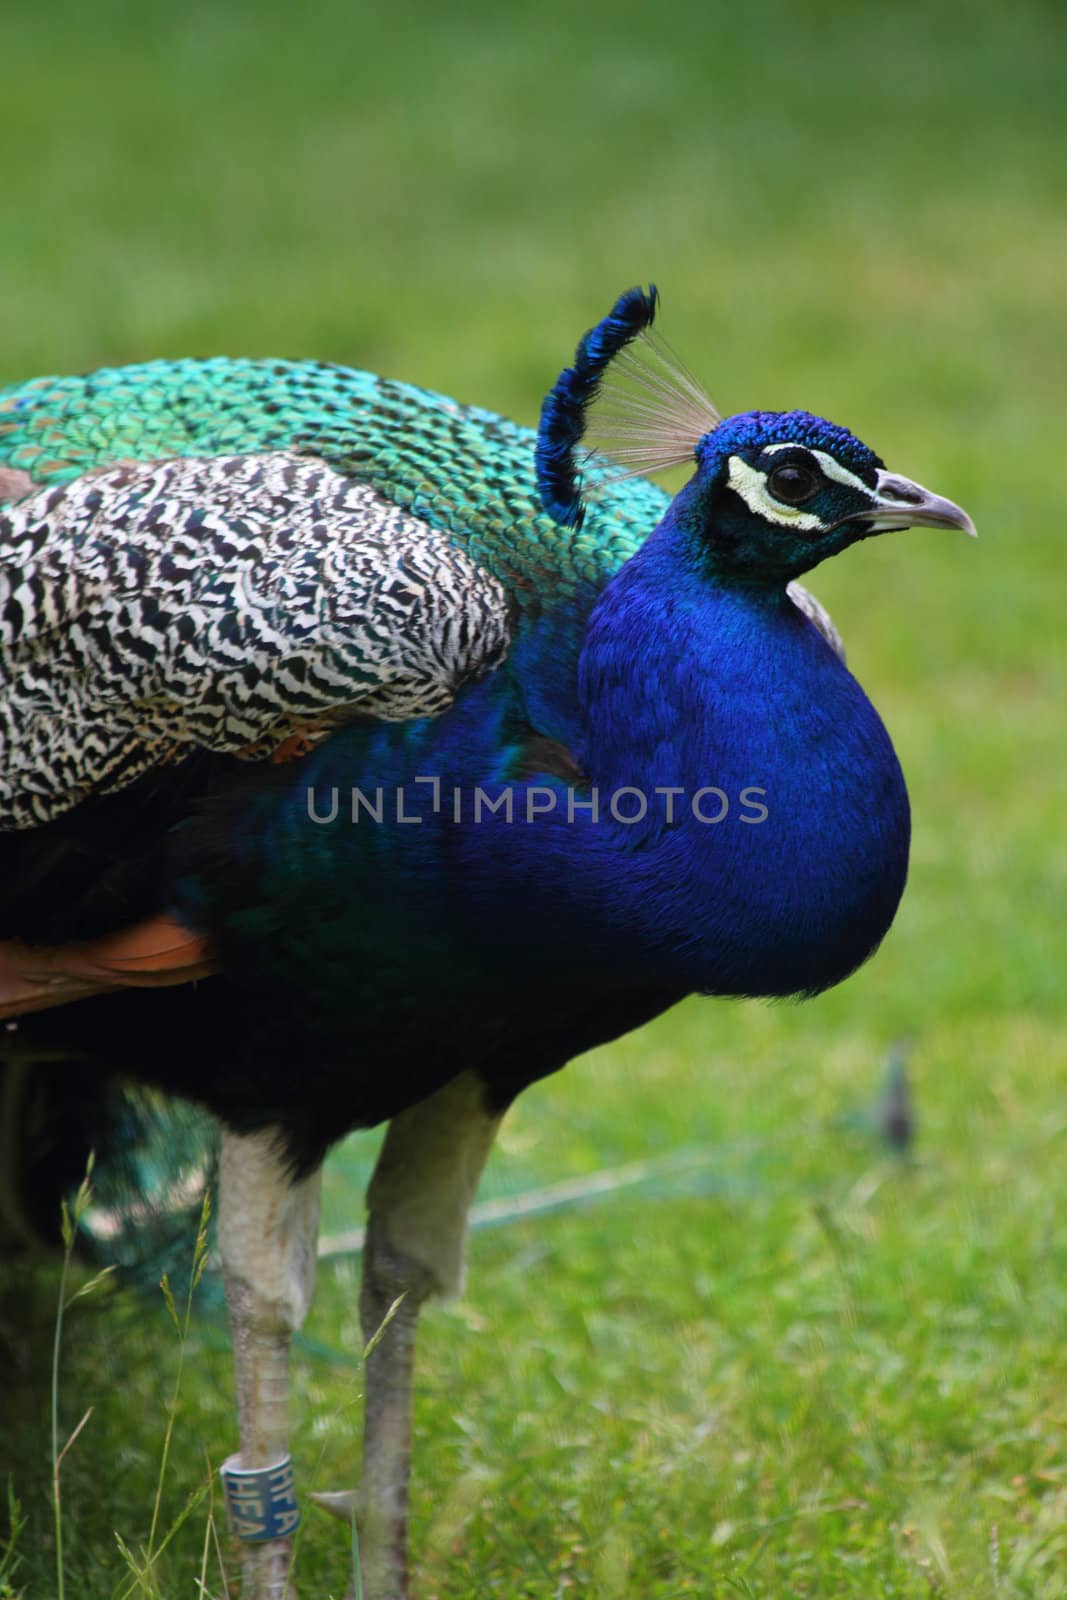 very nice peacock in the green grass